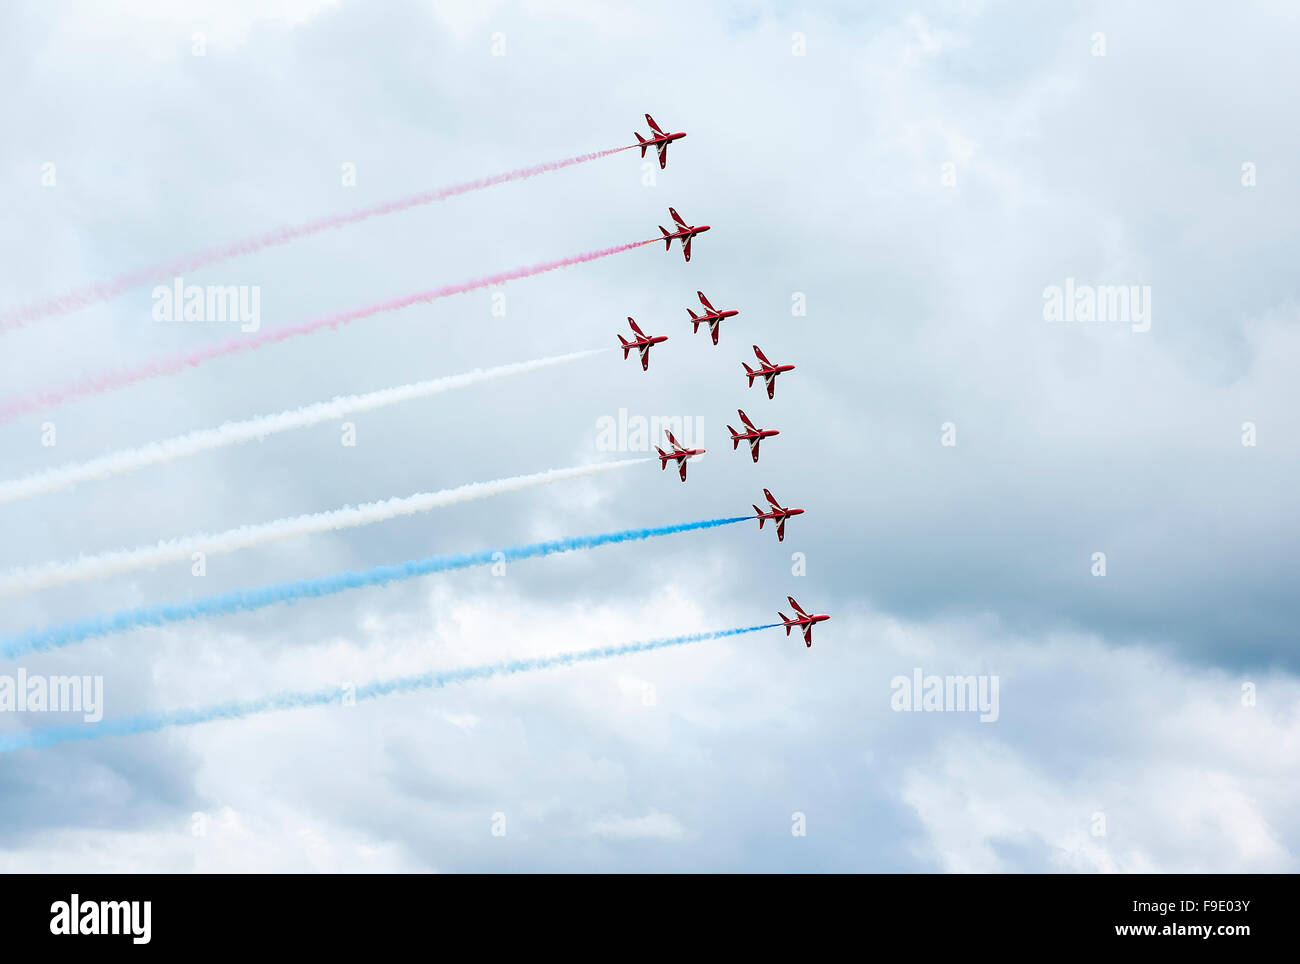 The PHOENIX formation by the British Red Arrows Hawk display team in UK Stock Photo